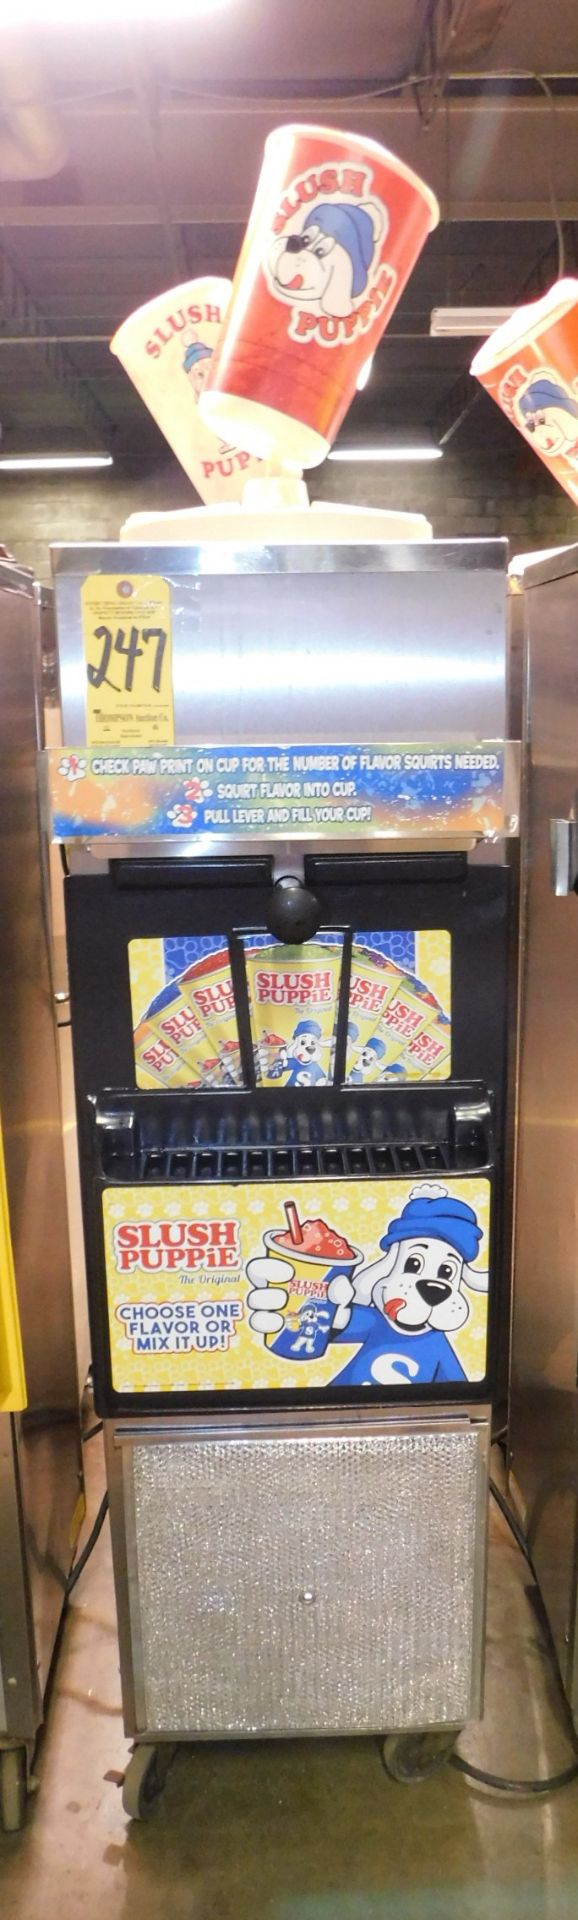 Slush Puppie Model SP12 Machine (These machines have been checked, cleaned and are ready for